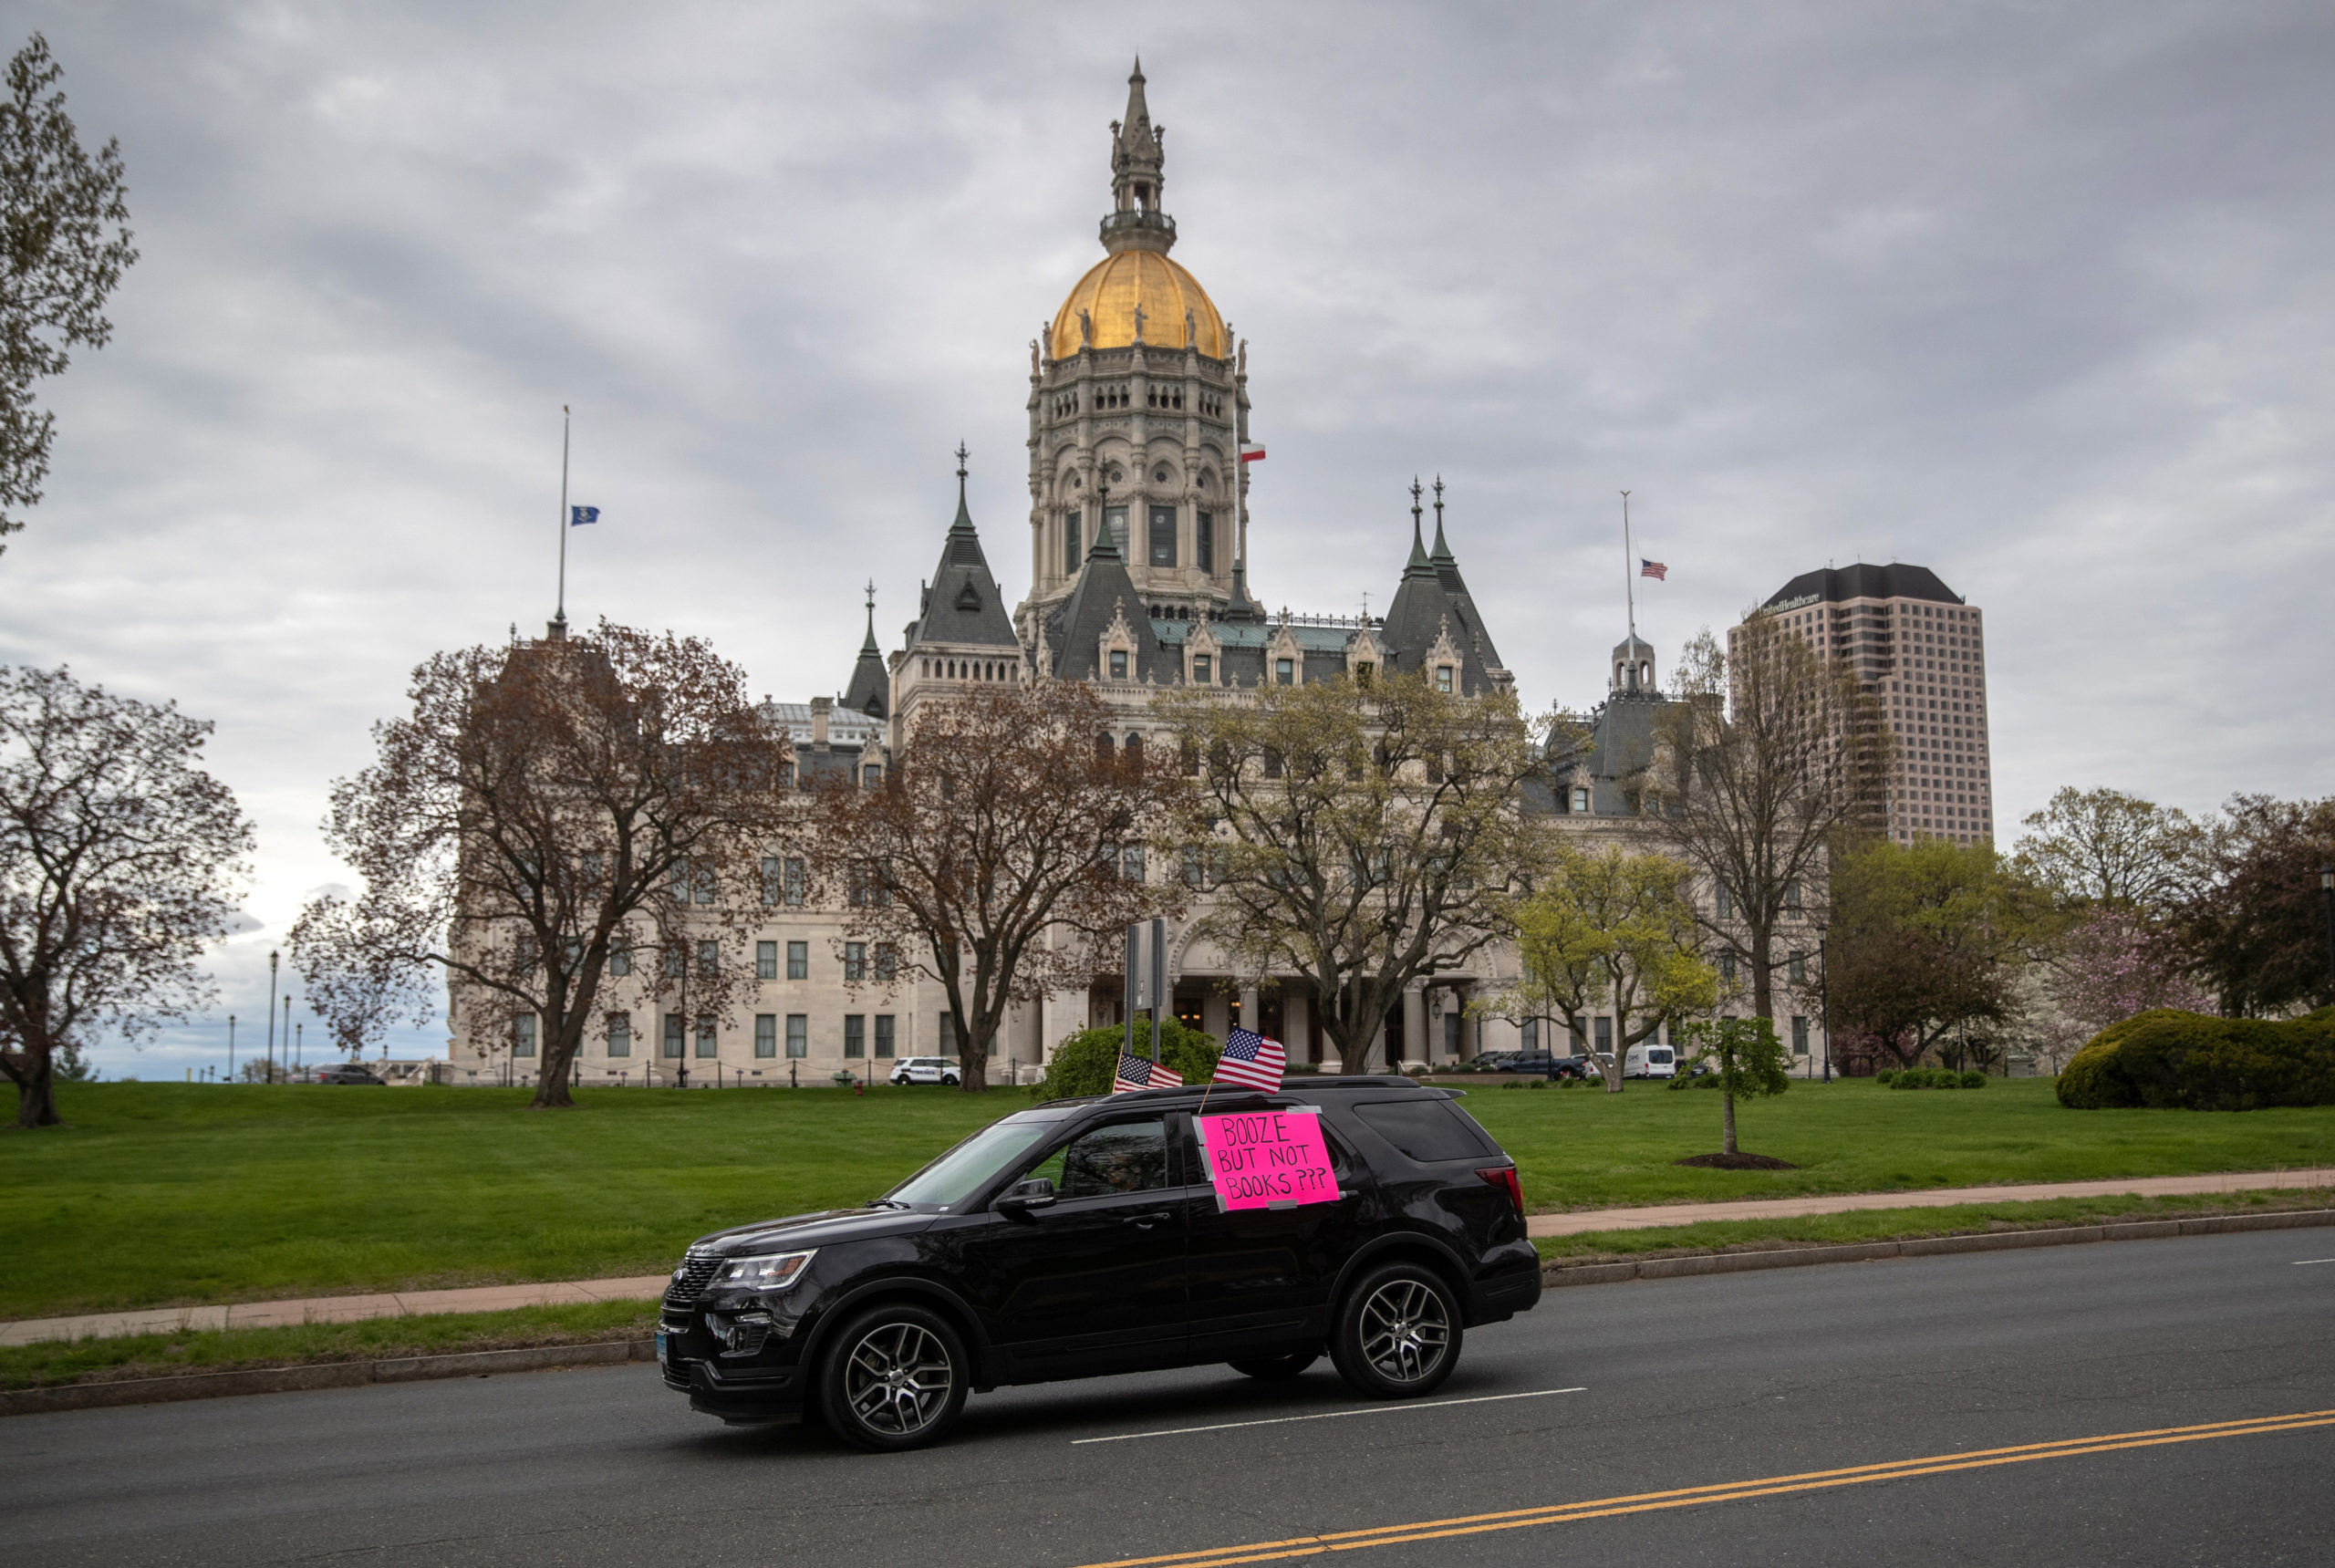 HARTFORD, CONNECTICUT - MAY 04: Demonstrators hold a "Rolling Car Rally" against Democratic Governor Ned Lamont's stay-at-home order to combat the coronavirus (COVID-19) pandemic on May 04, 2020 in Hartford, Connecticut. About a hundred vehicles drove around the state capital building and then the governor's mansion, displaying flags and signs. (Photo by John Moore/Getty Images)